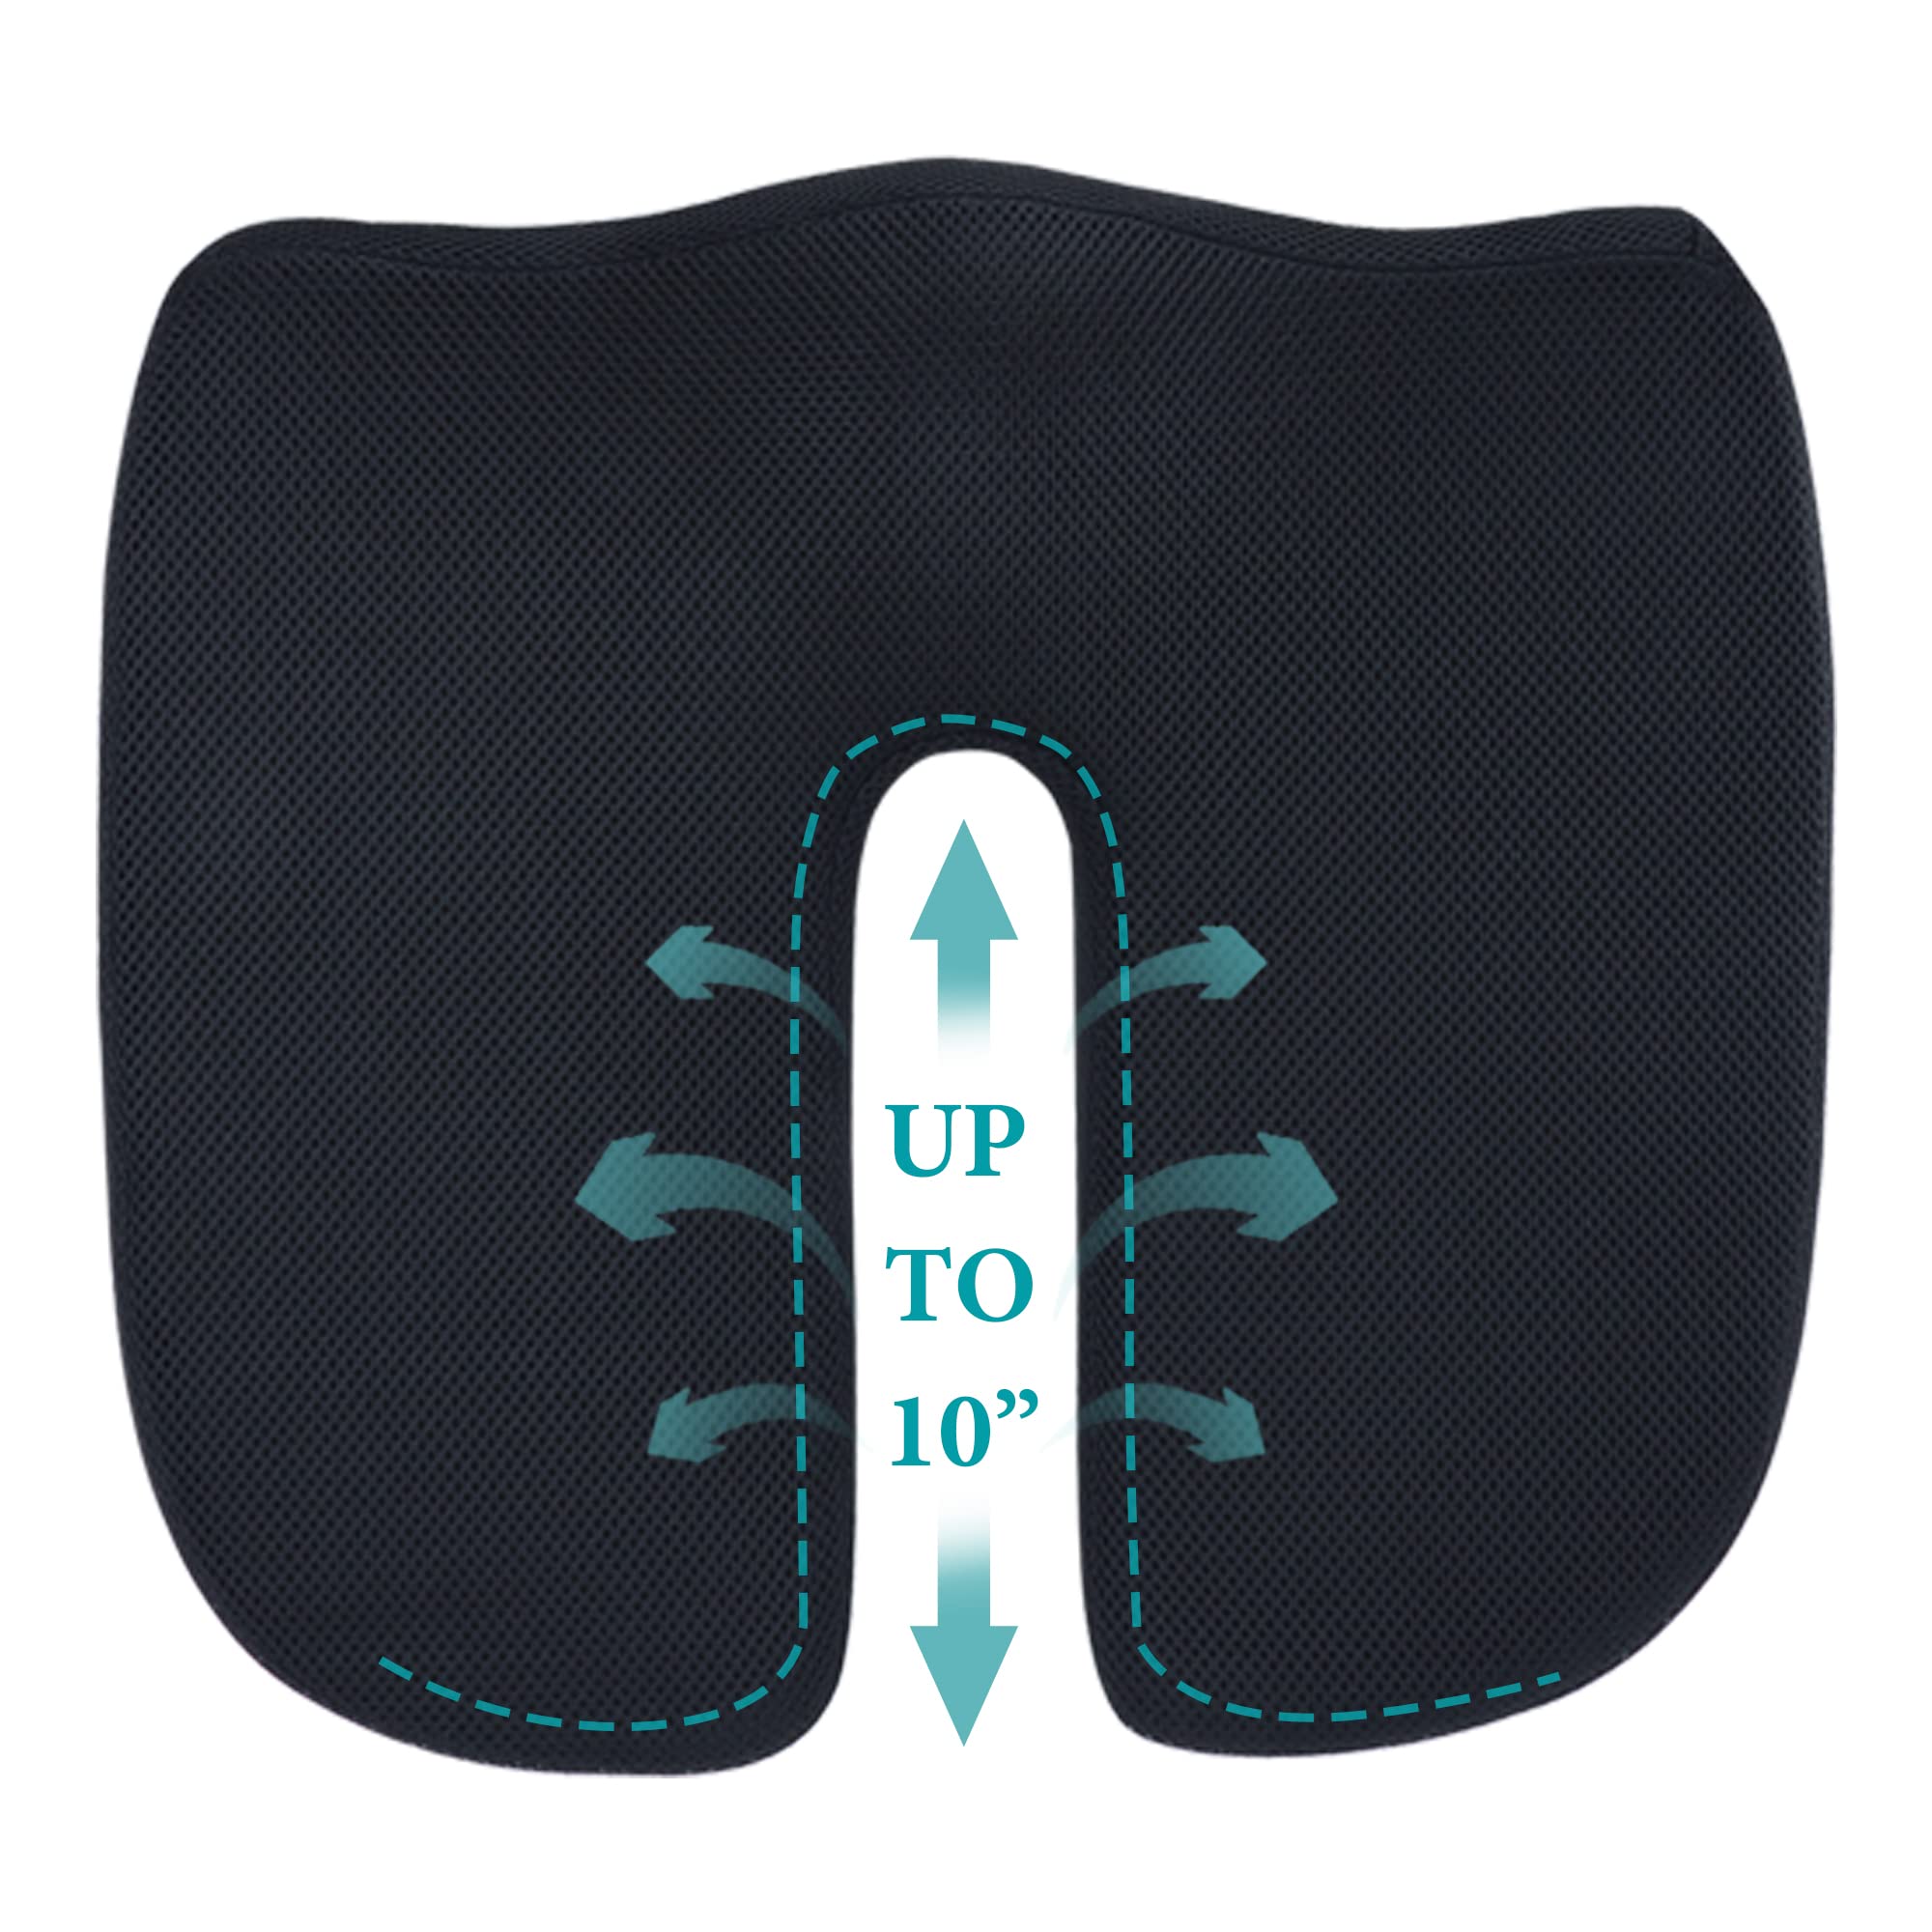 HxLmn Hx-zd-001 Upgraded Seat cushion Pillow for Tailbone Pain Relief  -Longer U-cutout,Memory Foam coccyx Seat cushion for Office chair,car Seat